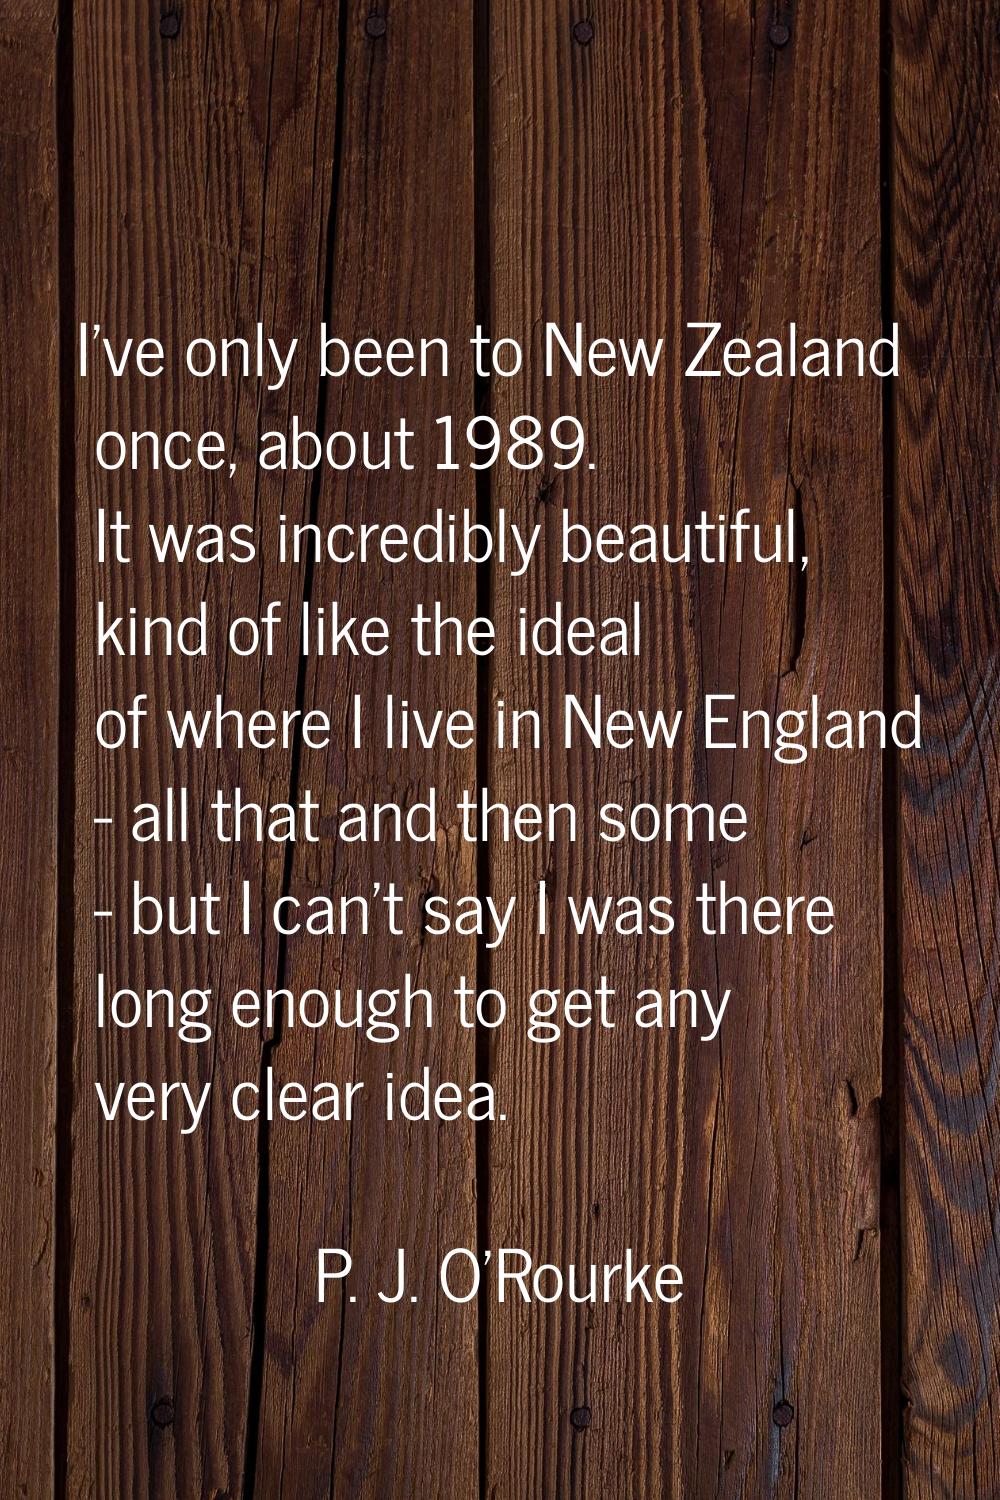 I've only been to New Zealand once, about 1989. It was incredibly beautiful, kind of like the ideal